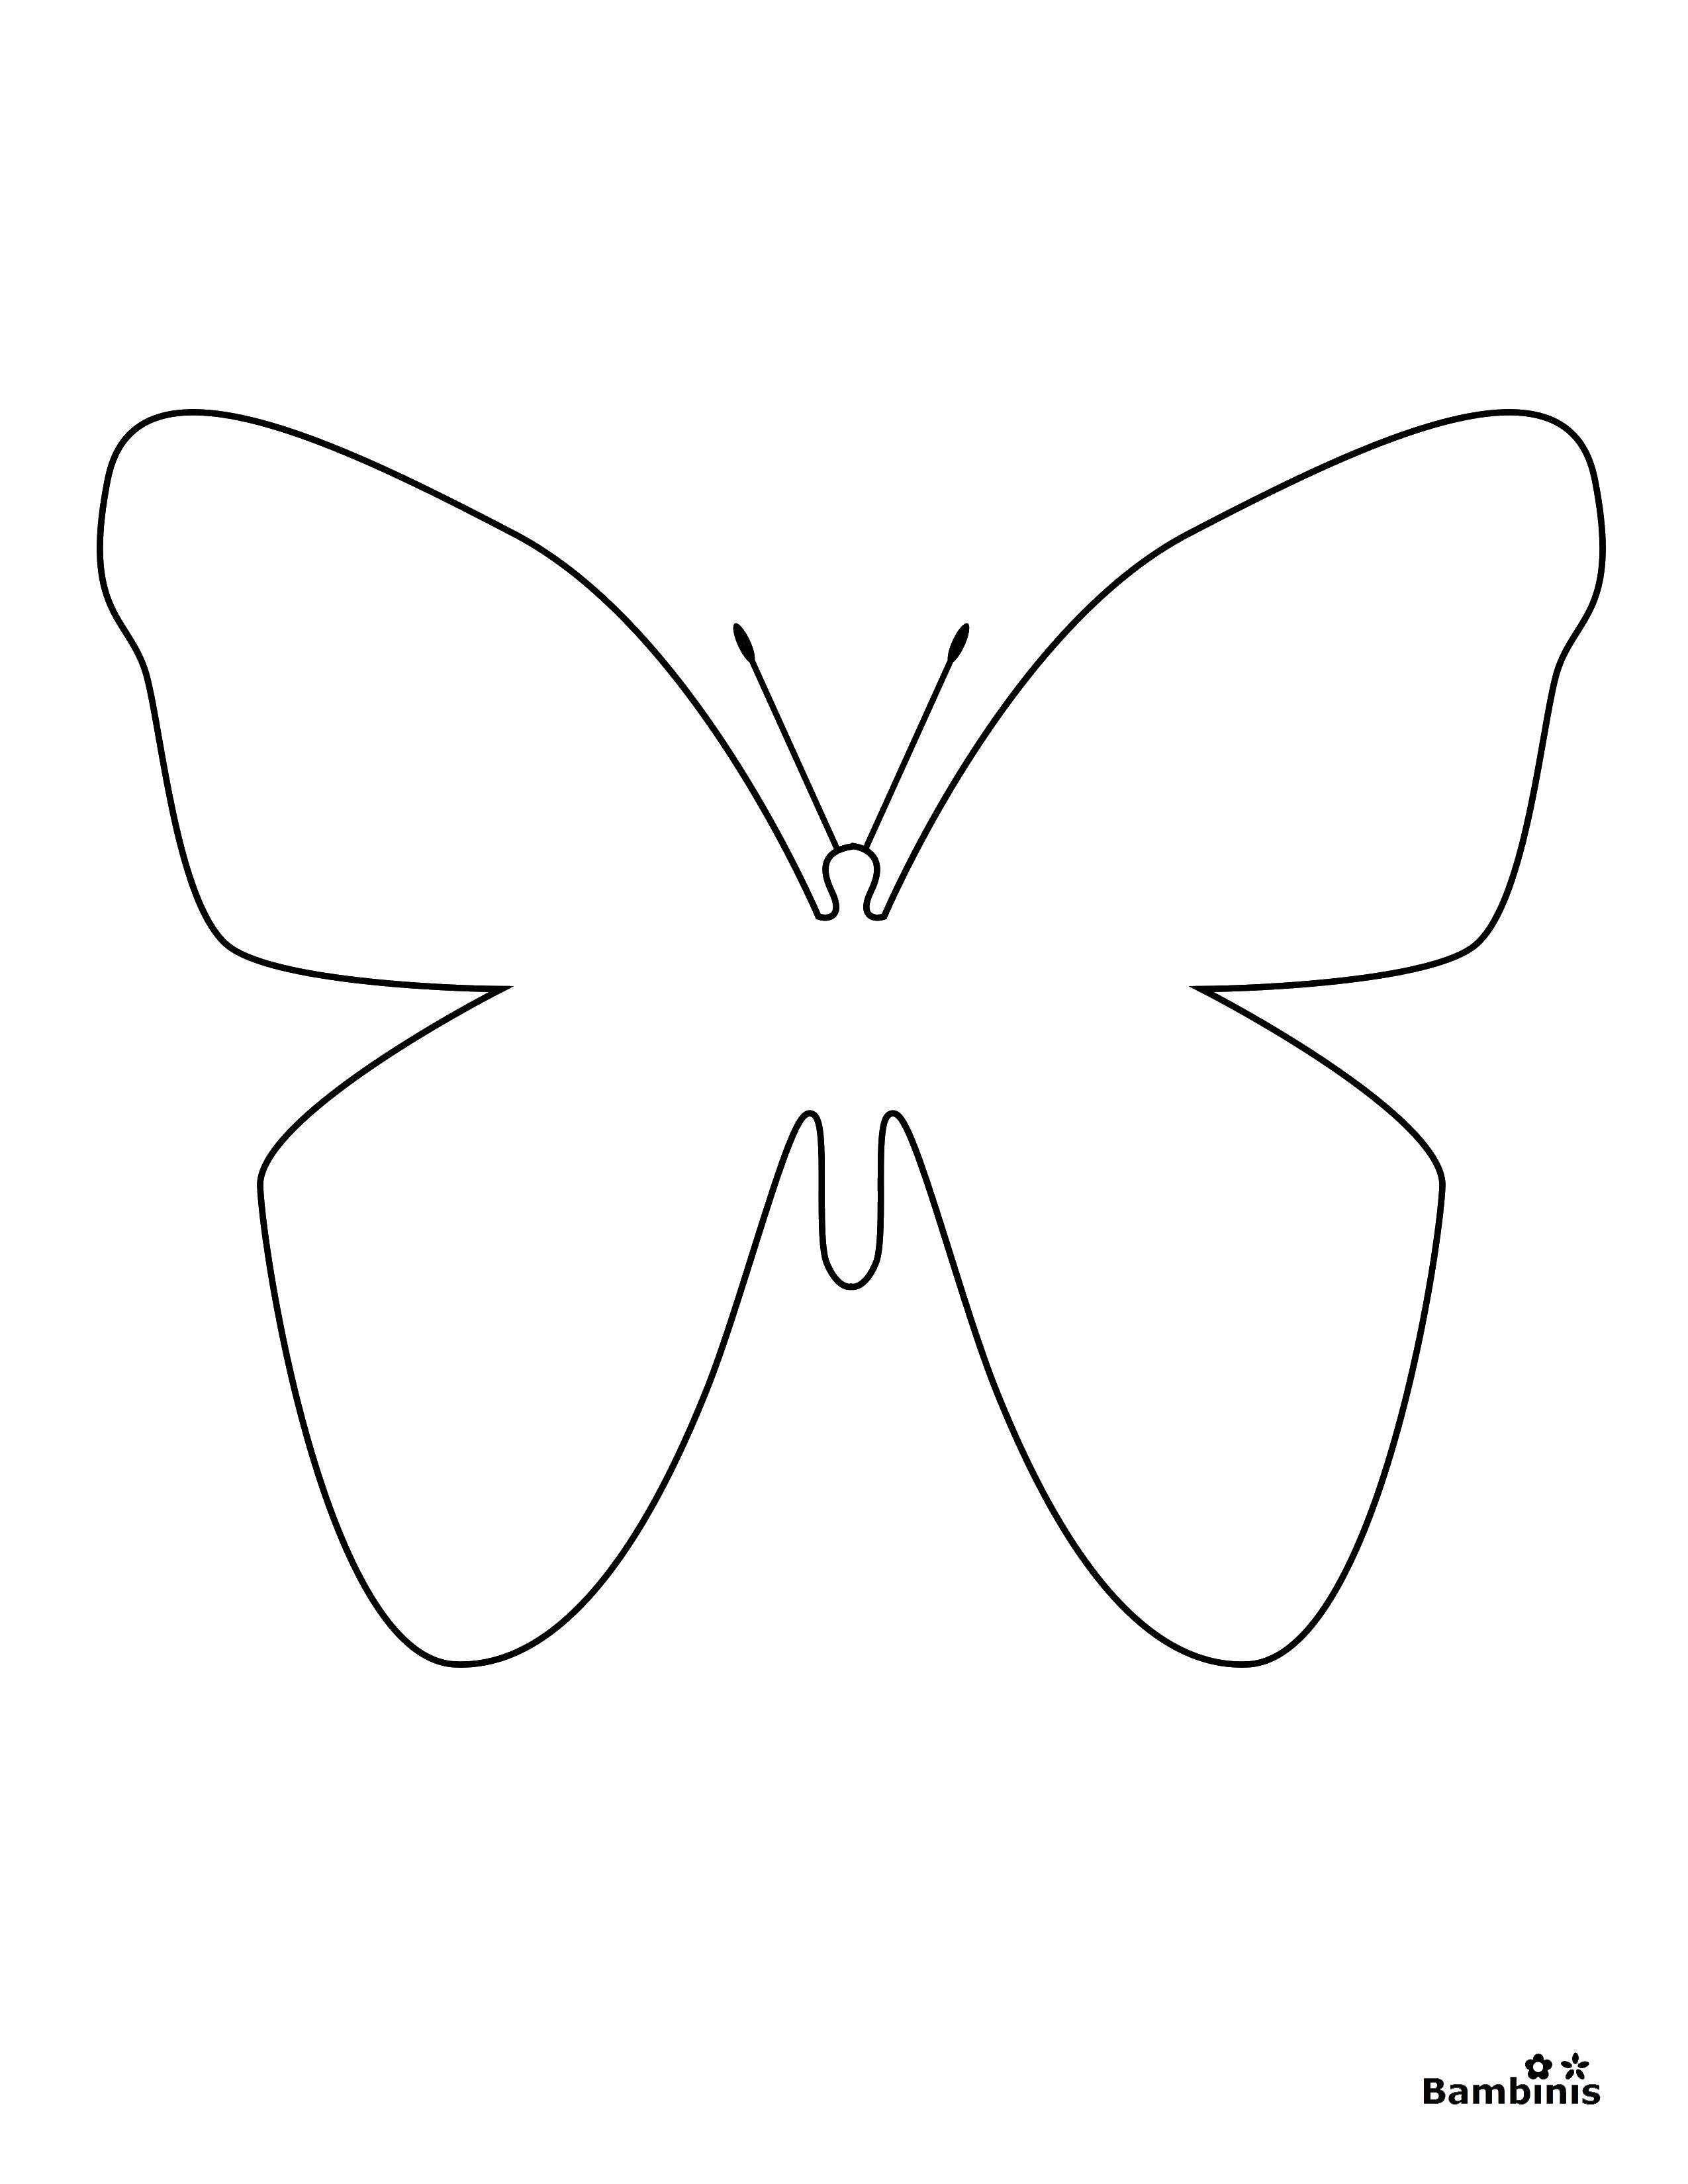 Coloring Butterfly and loop. Category Insects. Tags:  outline , butterfly wings.